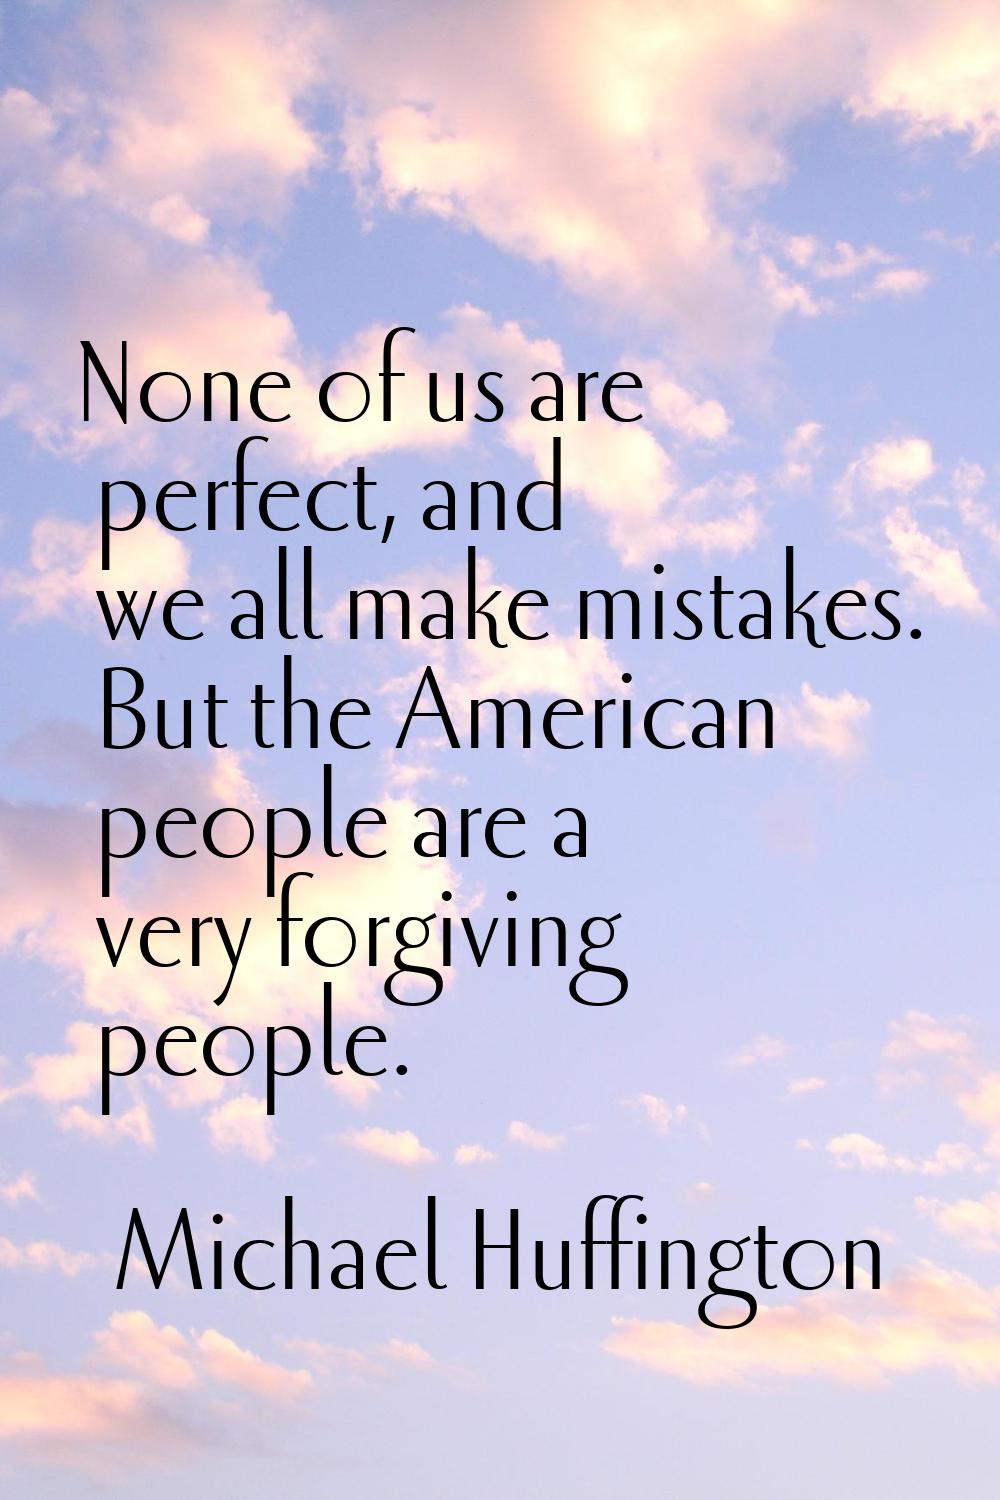 None of us are perfect, and we all make mistakes. But the American people are a very forgiving peop